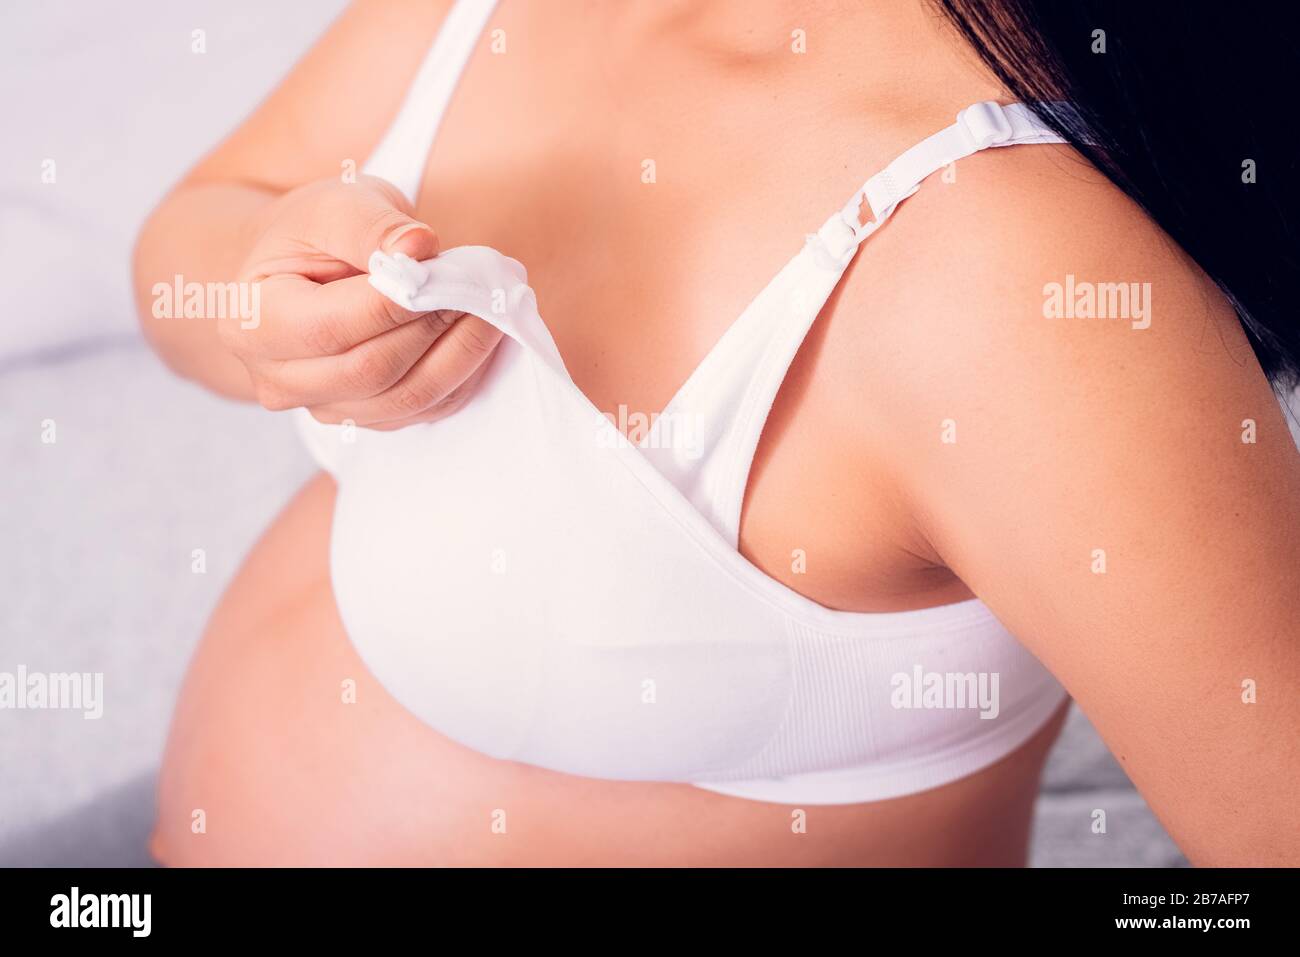 Pregnant woman holding nursing bra with easy breast access for baby feeding. Stock Photo